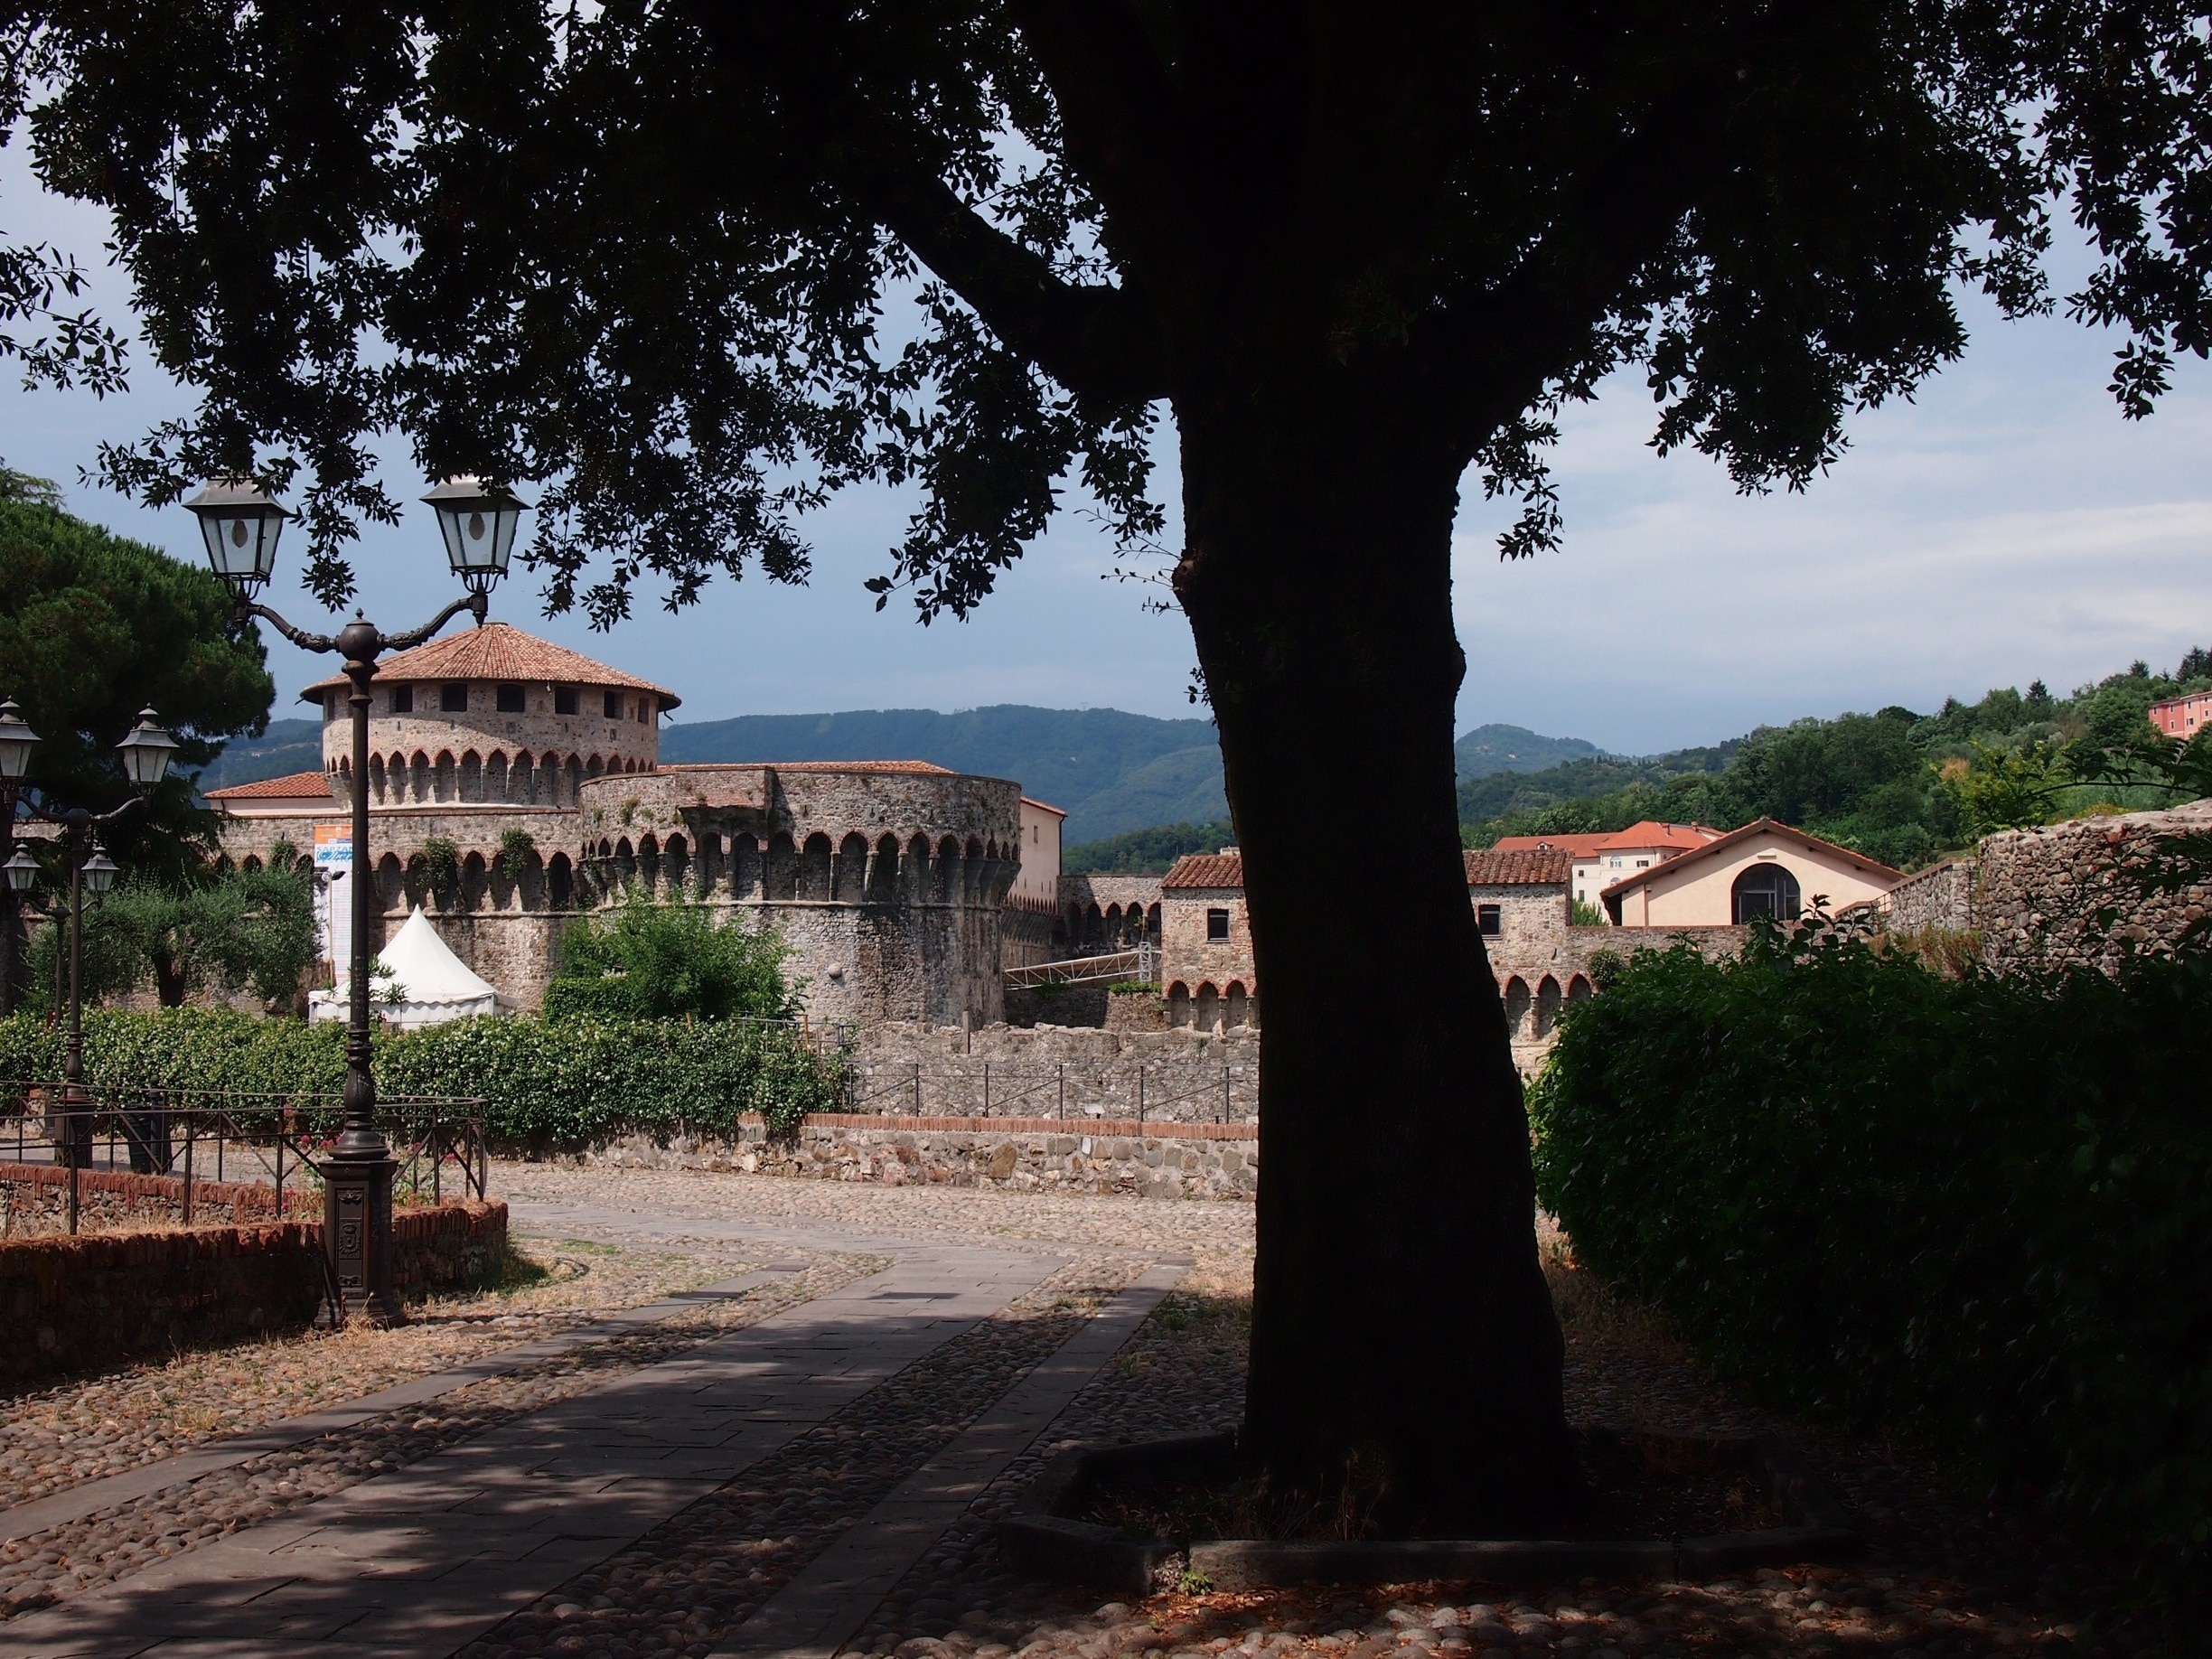 View of the Fortezza, from the top of the nearby hill, bordering the city of Sarzana.